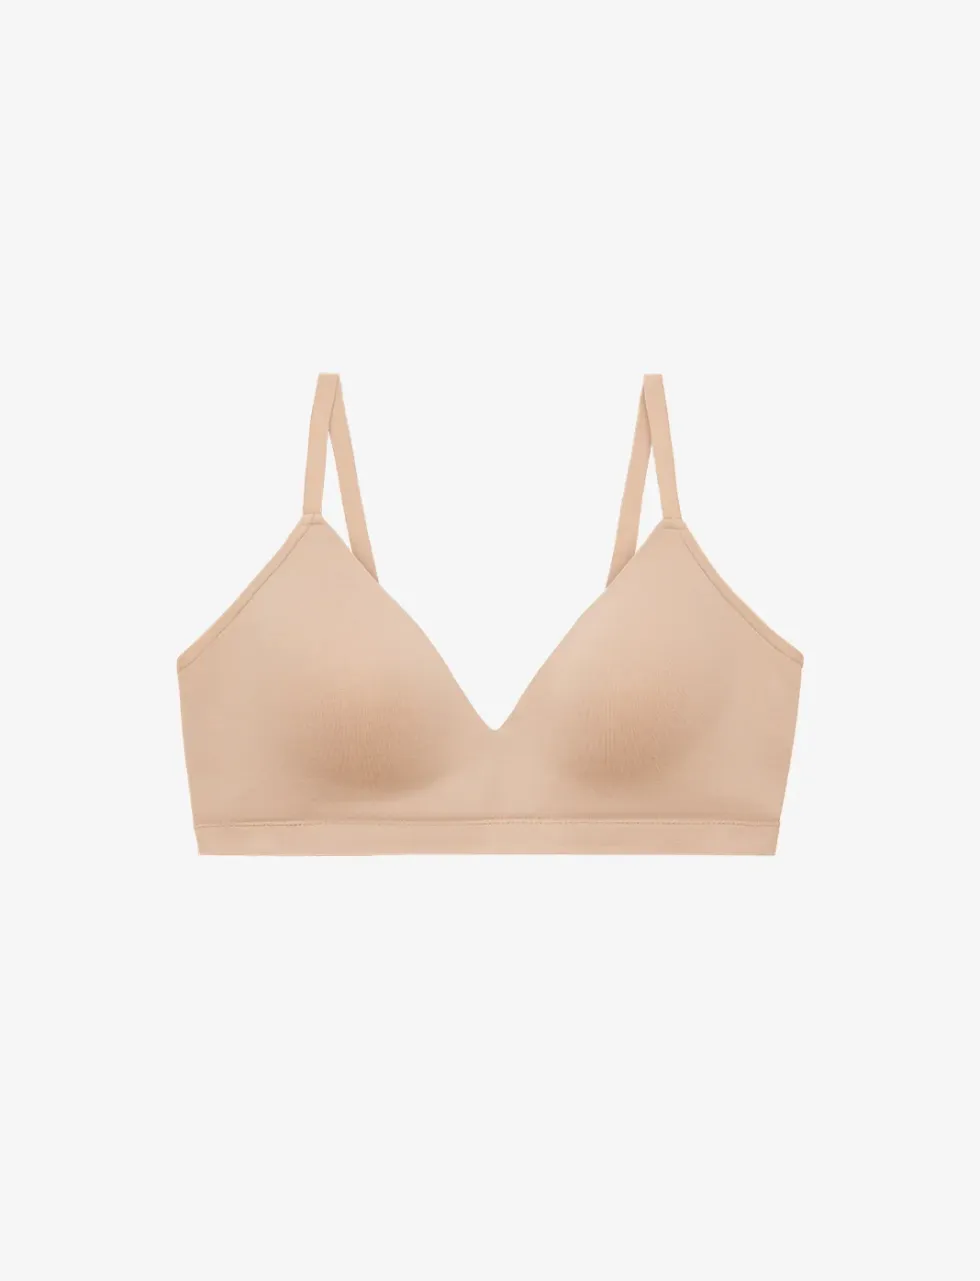 We Tried a Bra: The Best Stretchy Bra for Different-Sized Boobs - Brit + Co